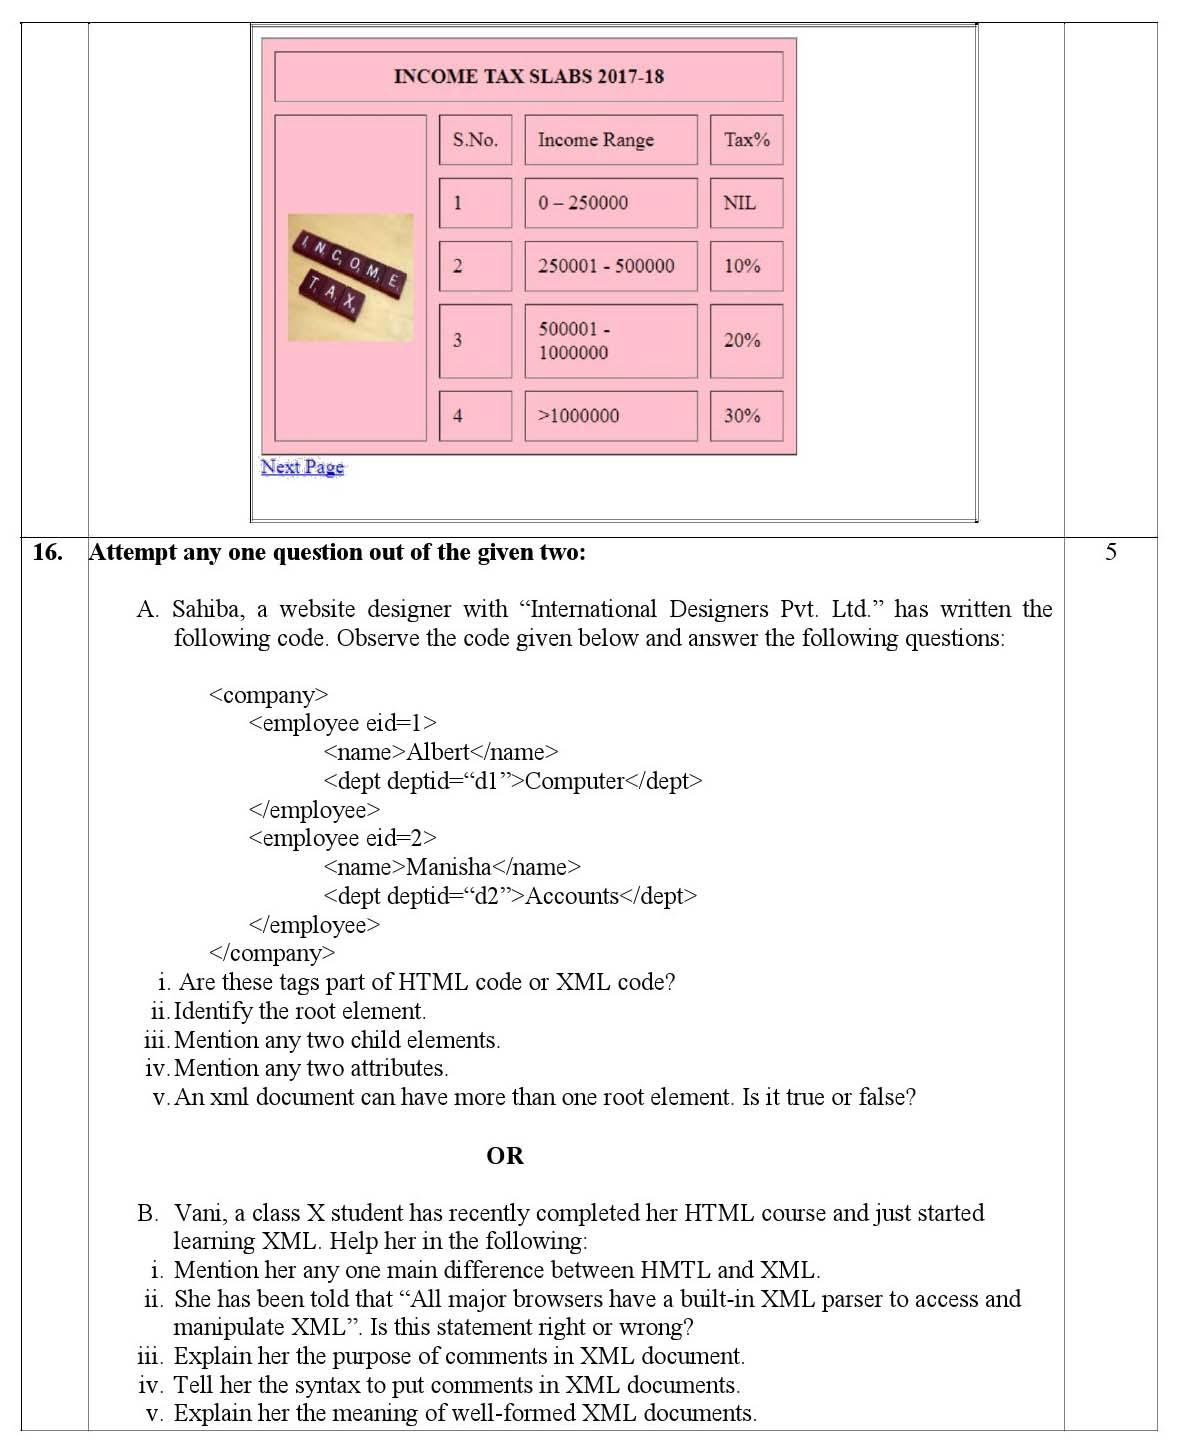 Foundation of Information Technology CBSE Class X Sample Question Paper 2018 19 - Image 3